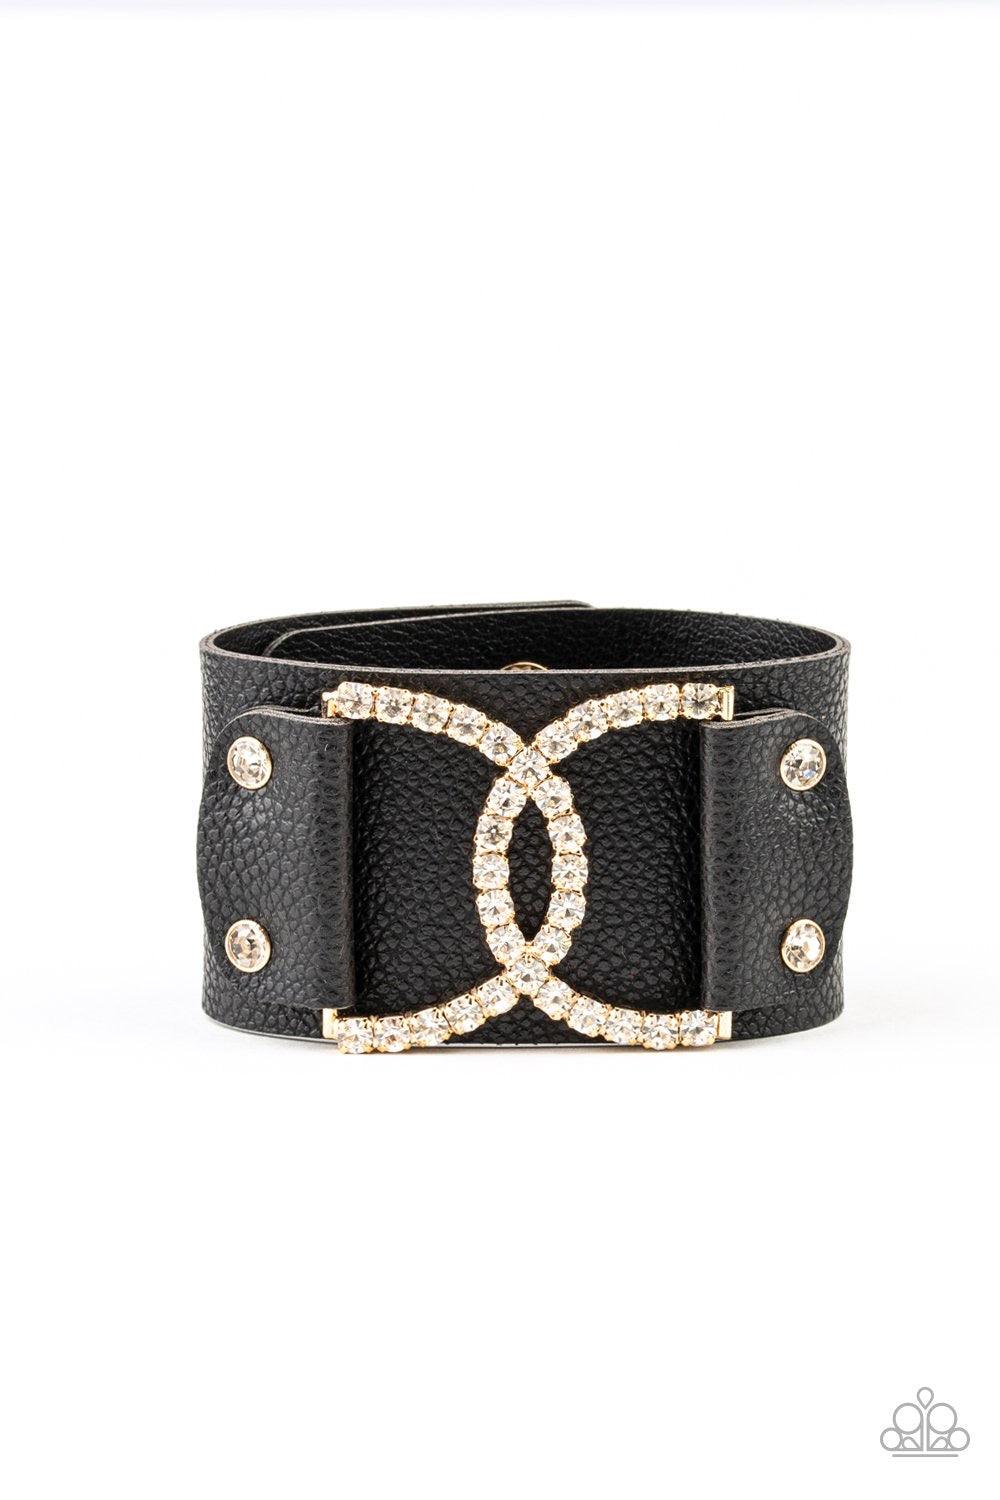 Paparazzi Accessories Couture Culture - Gold Encrusted in glassy white rhinestones, two interlocking half moon gold frames are studded in place across the front of a black leather band for a statement-making finish. Features an adjustable snap closure. So